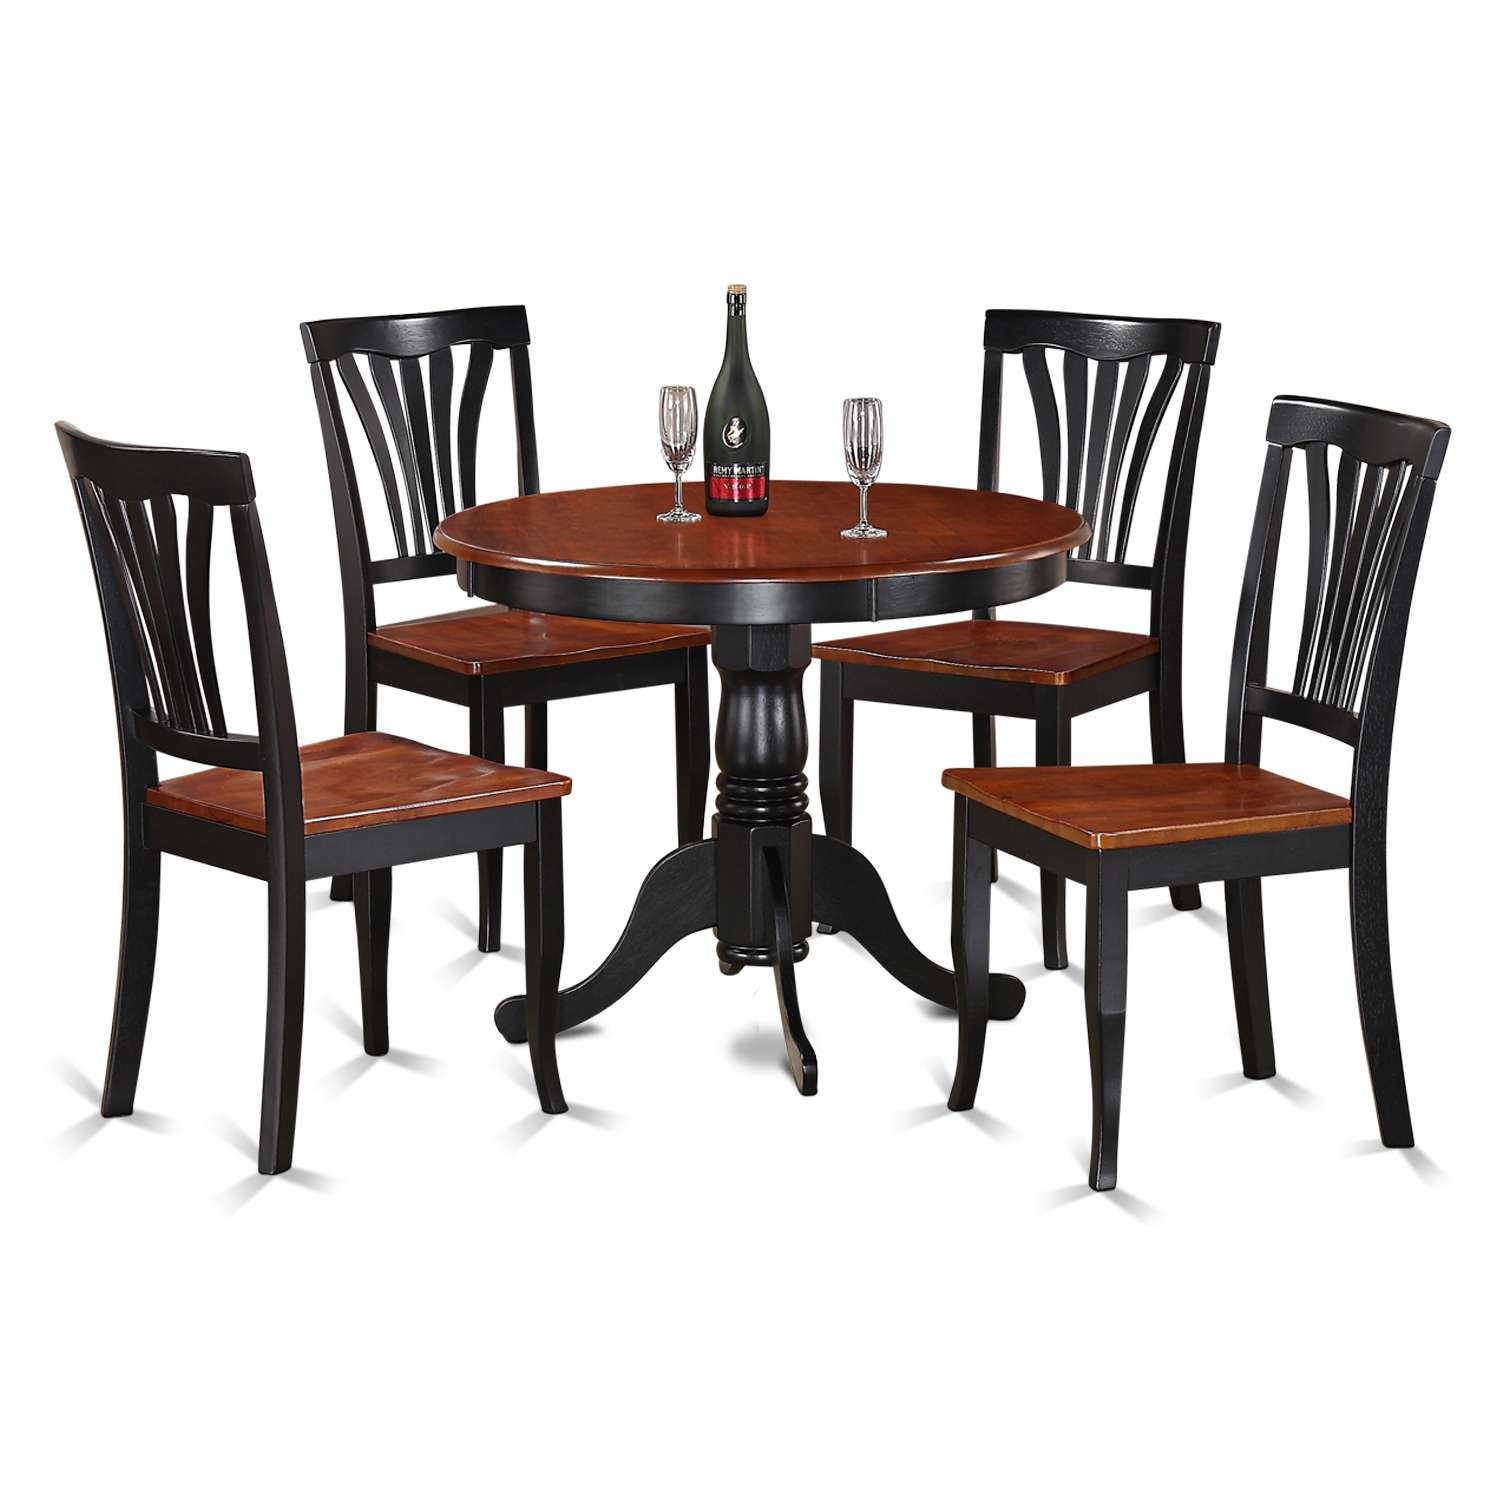 Small Round Kitchen Table Set
 East West Furniture Antique 5 Piece Small Kitchen Table